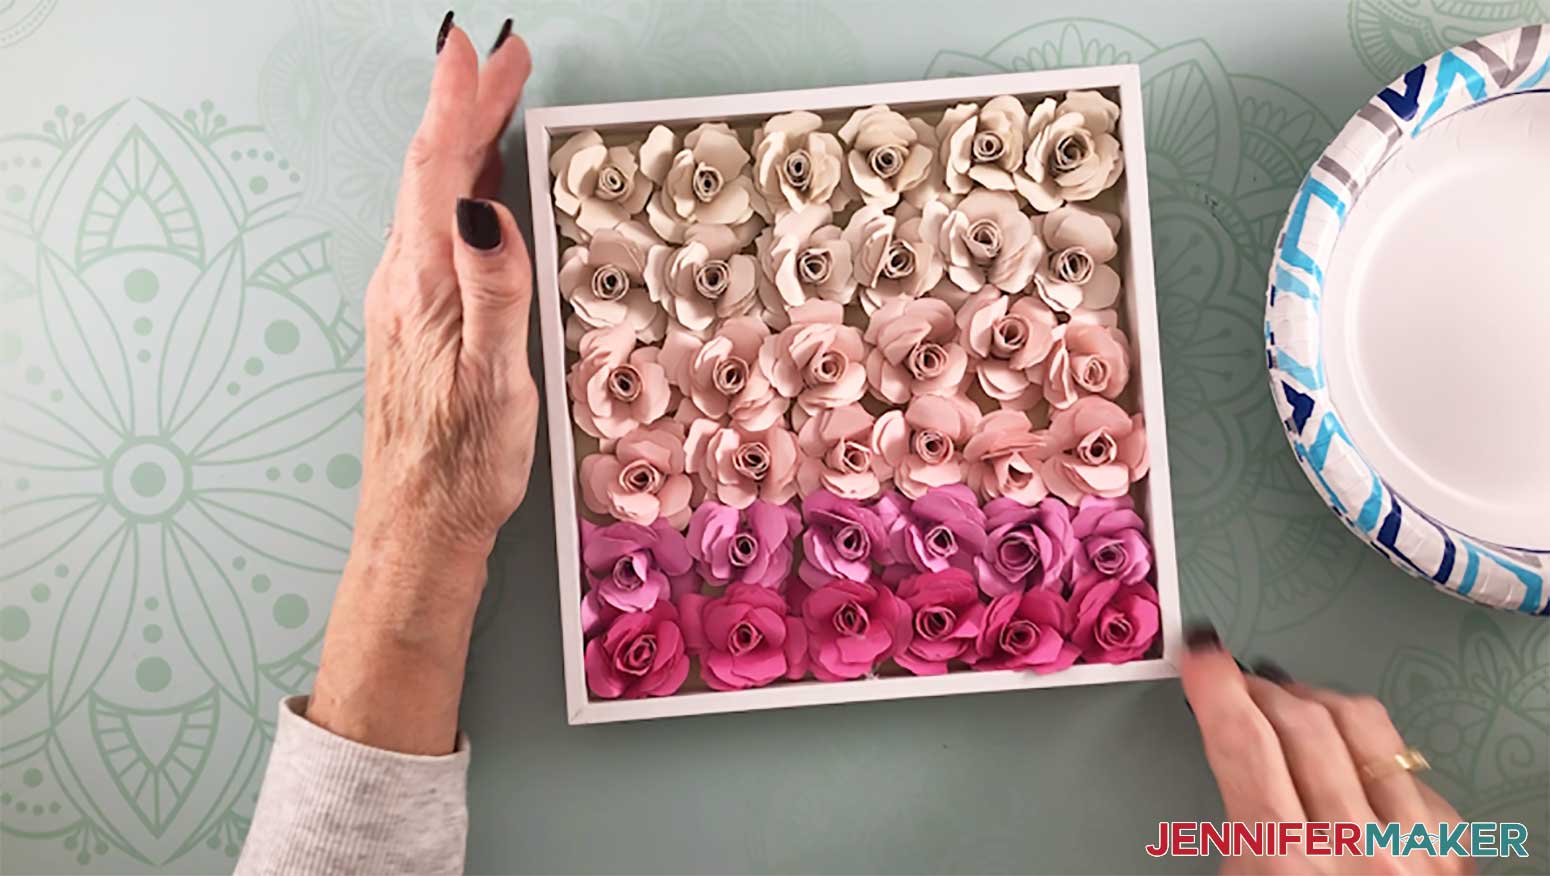 36 pink paper flowers glued inside a shadow box frame to make a paper flower shadow box